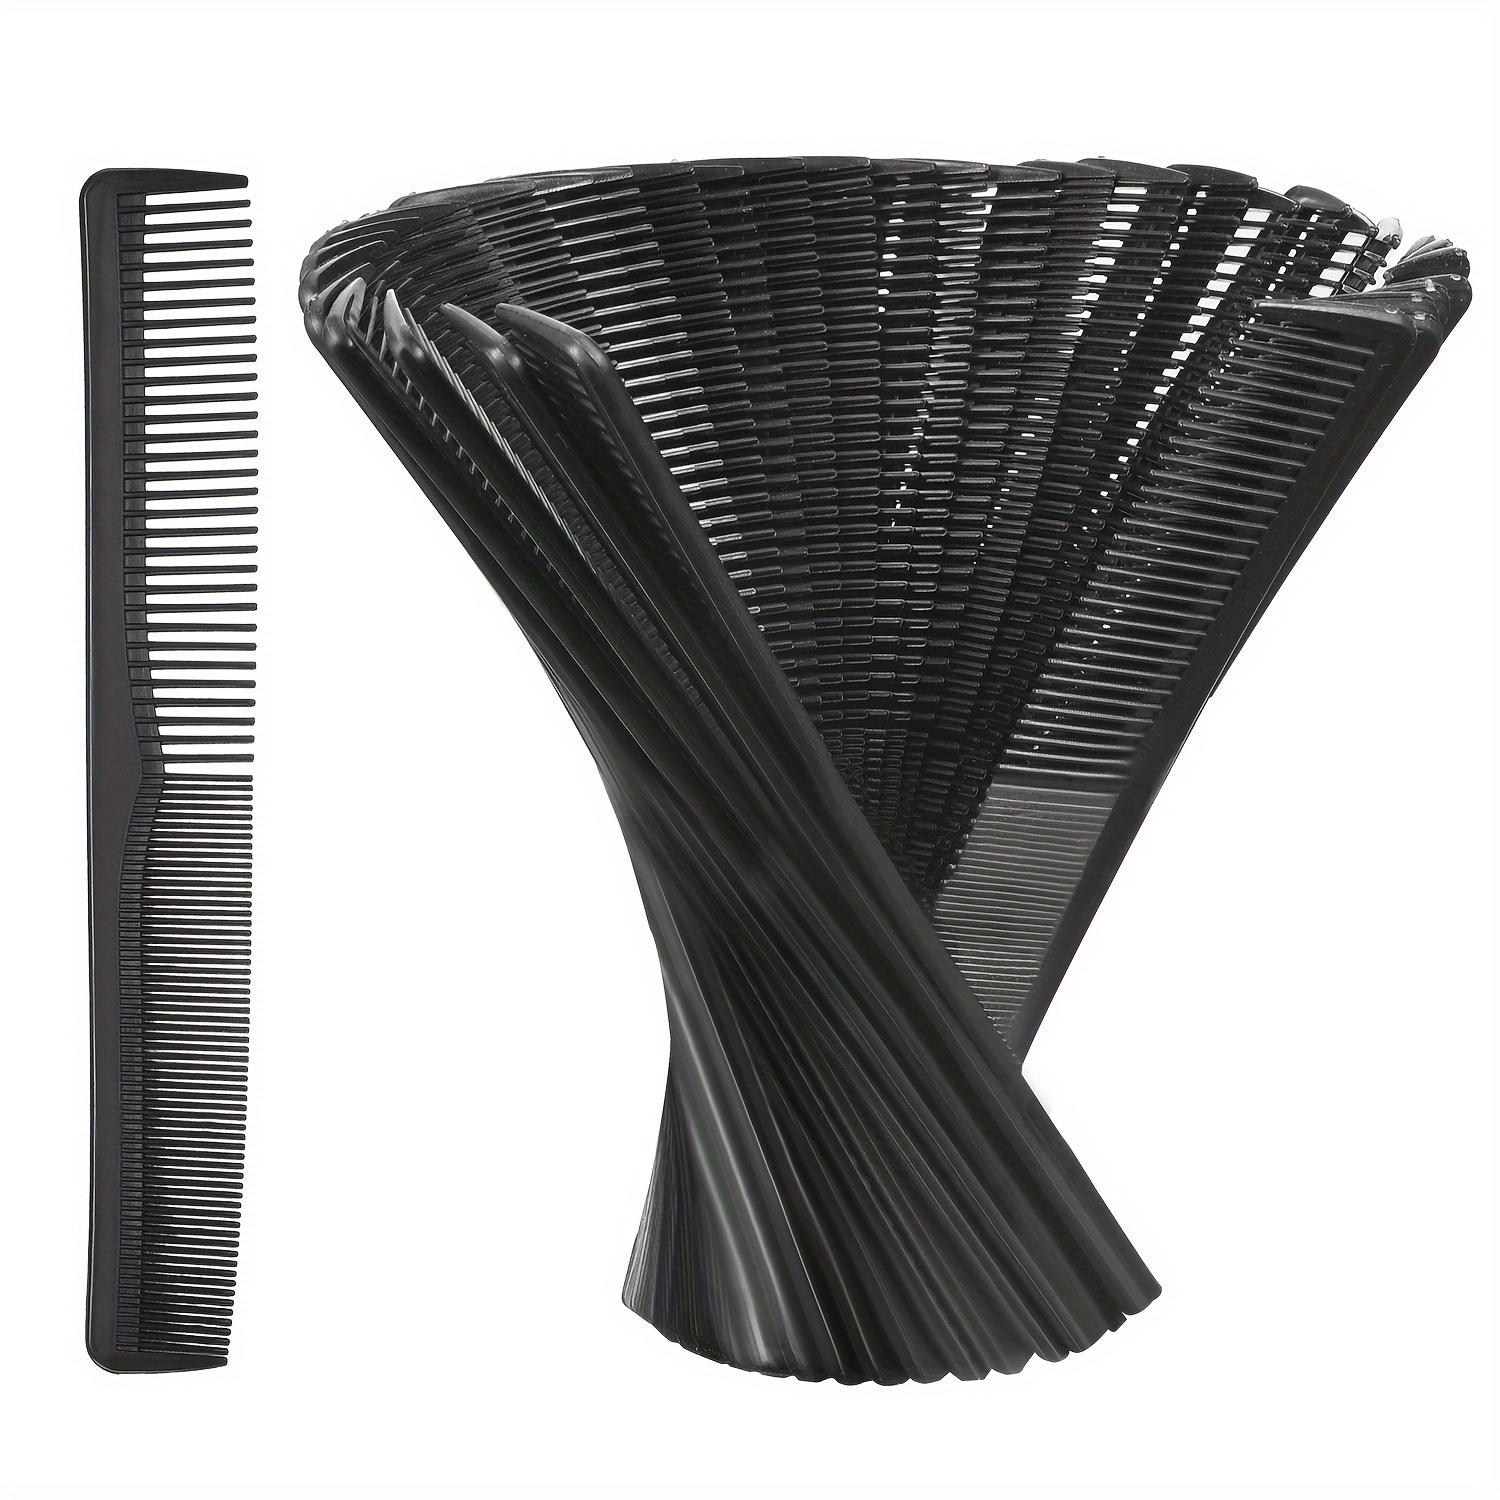 

50pcs/set Hairdressing Comb, Double Sided Plastic Hair Comb, Barber Salon Household Hair Styling Comb For All Hair Types